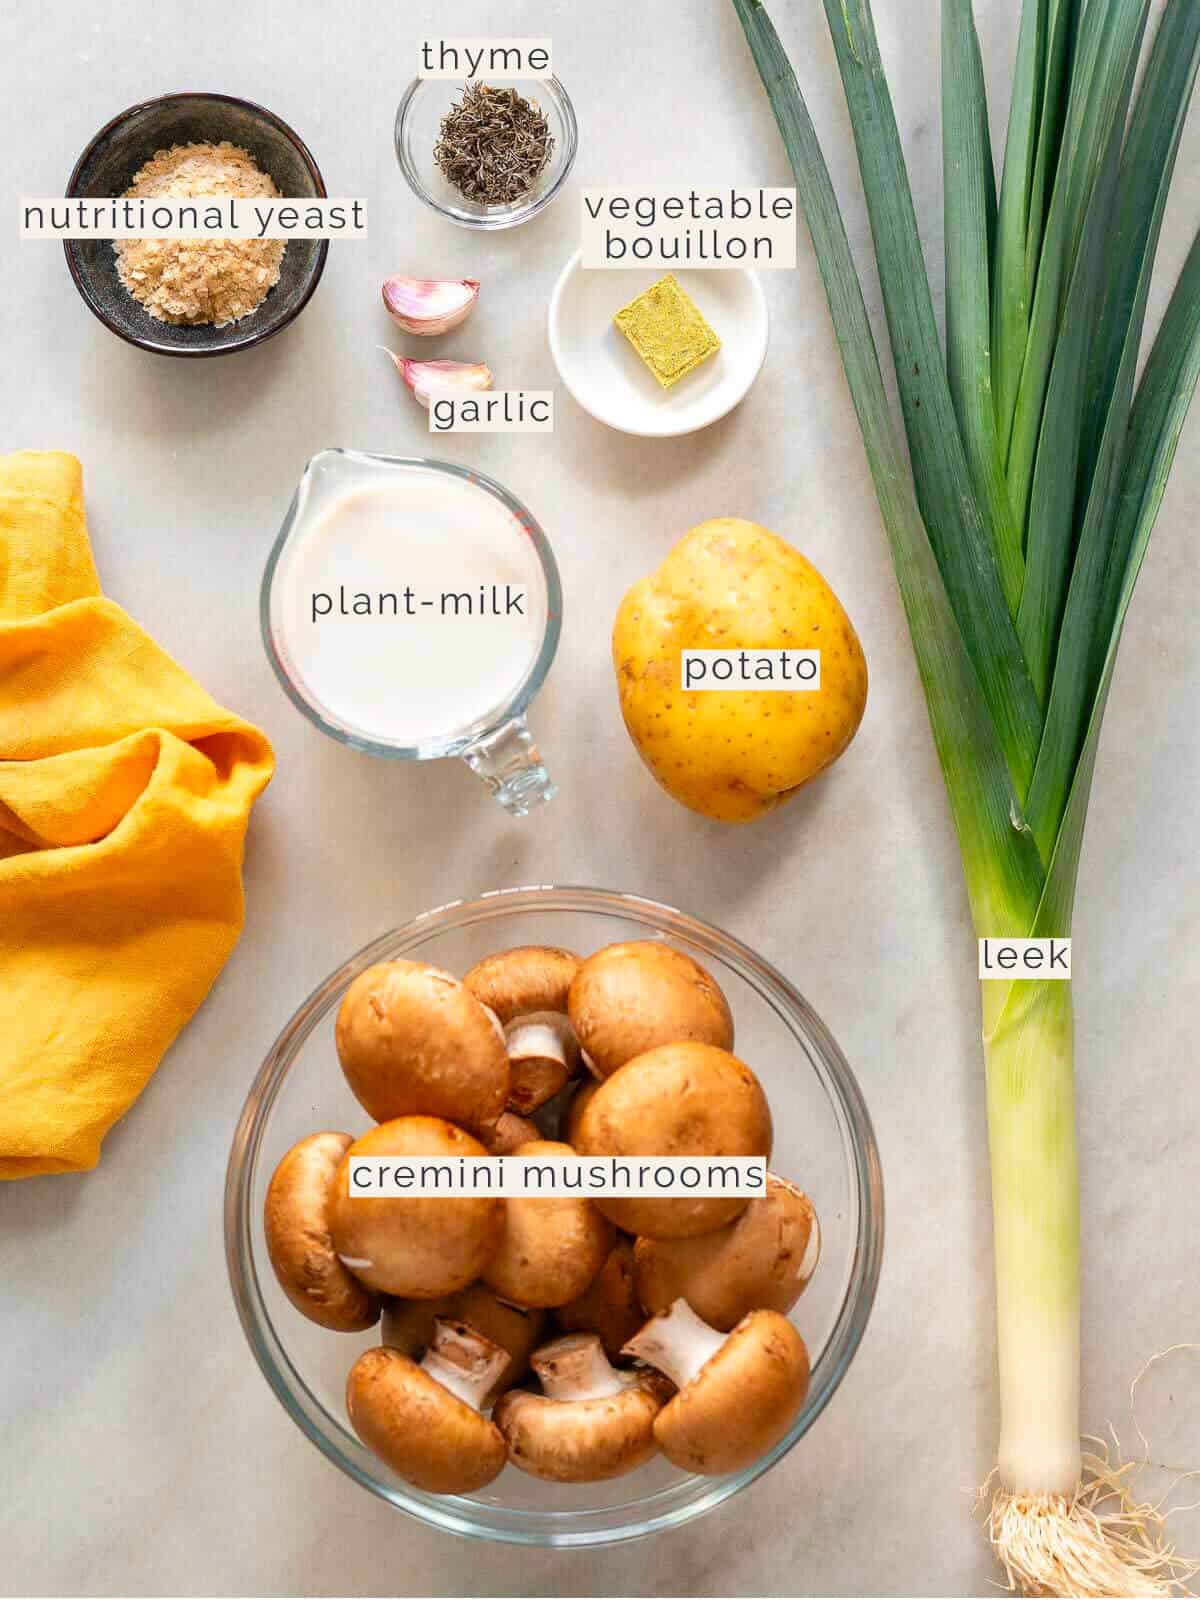 labeled ingredients to make a mushroom soup without cream.